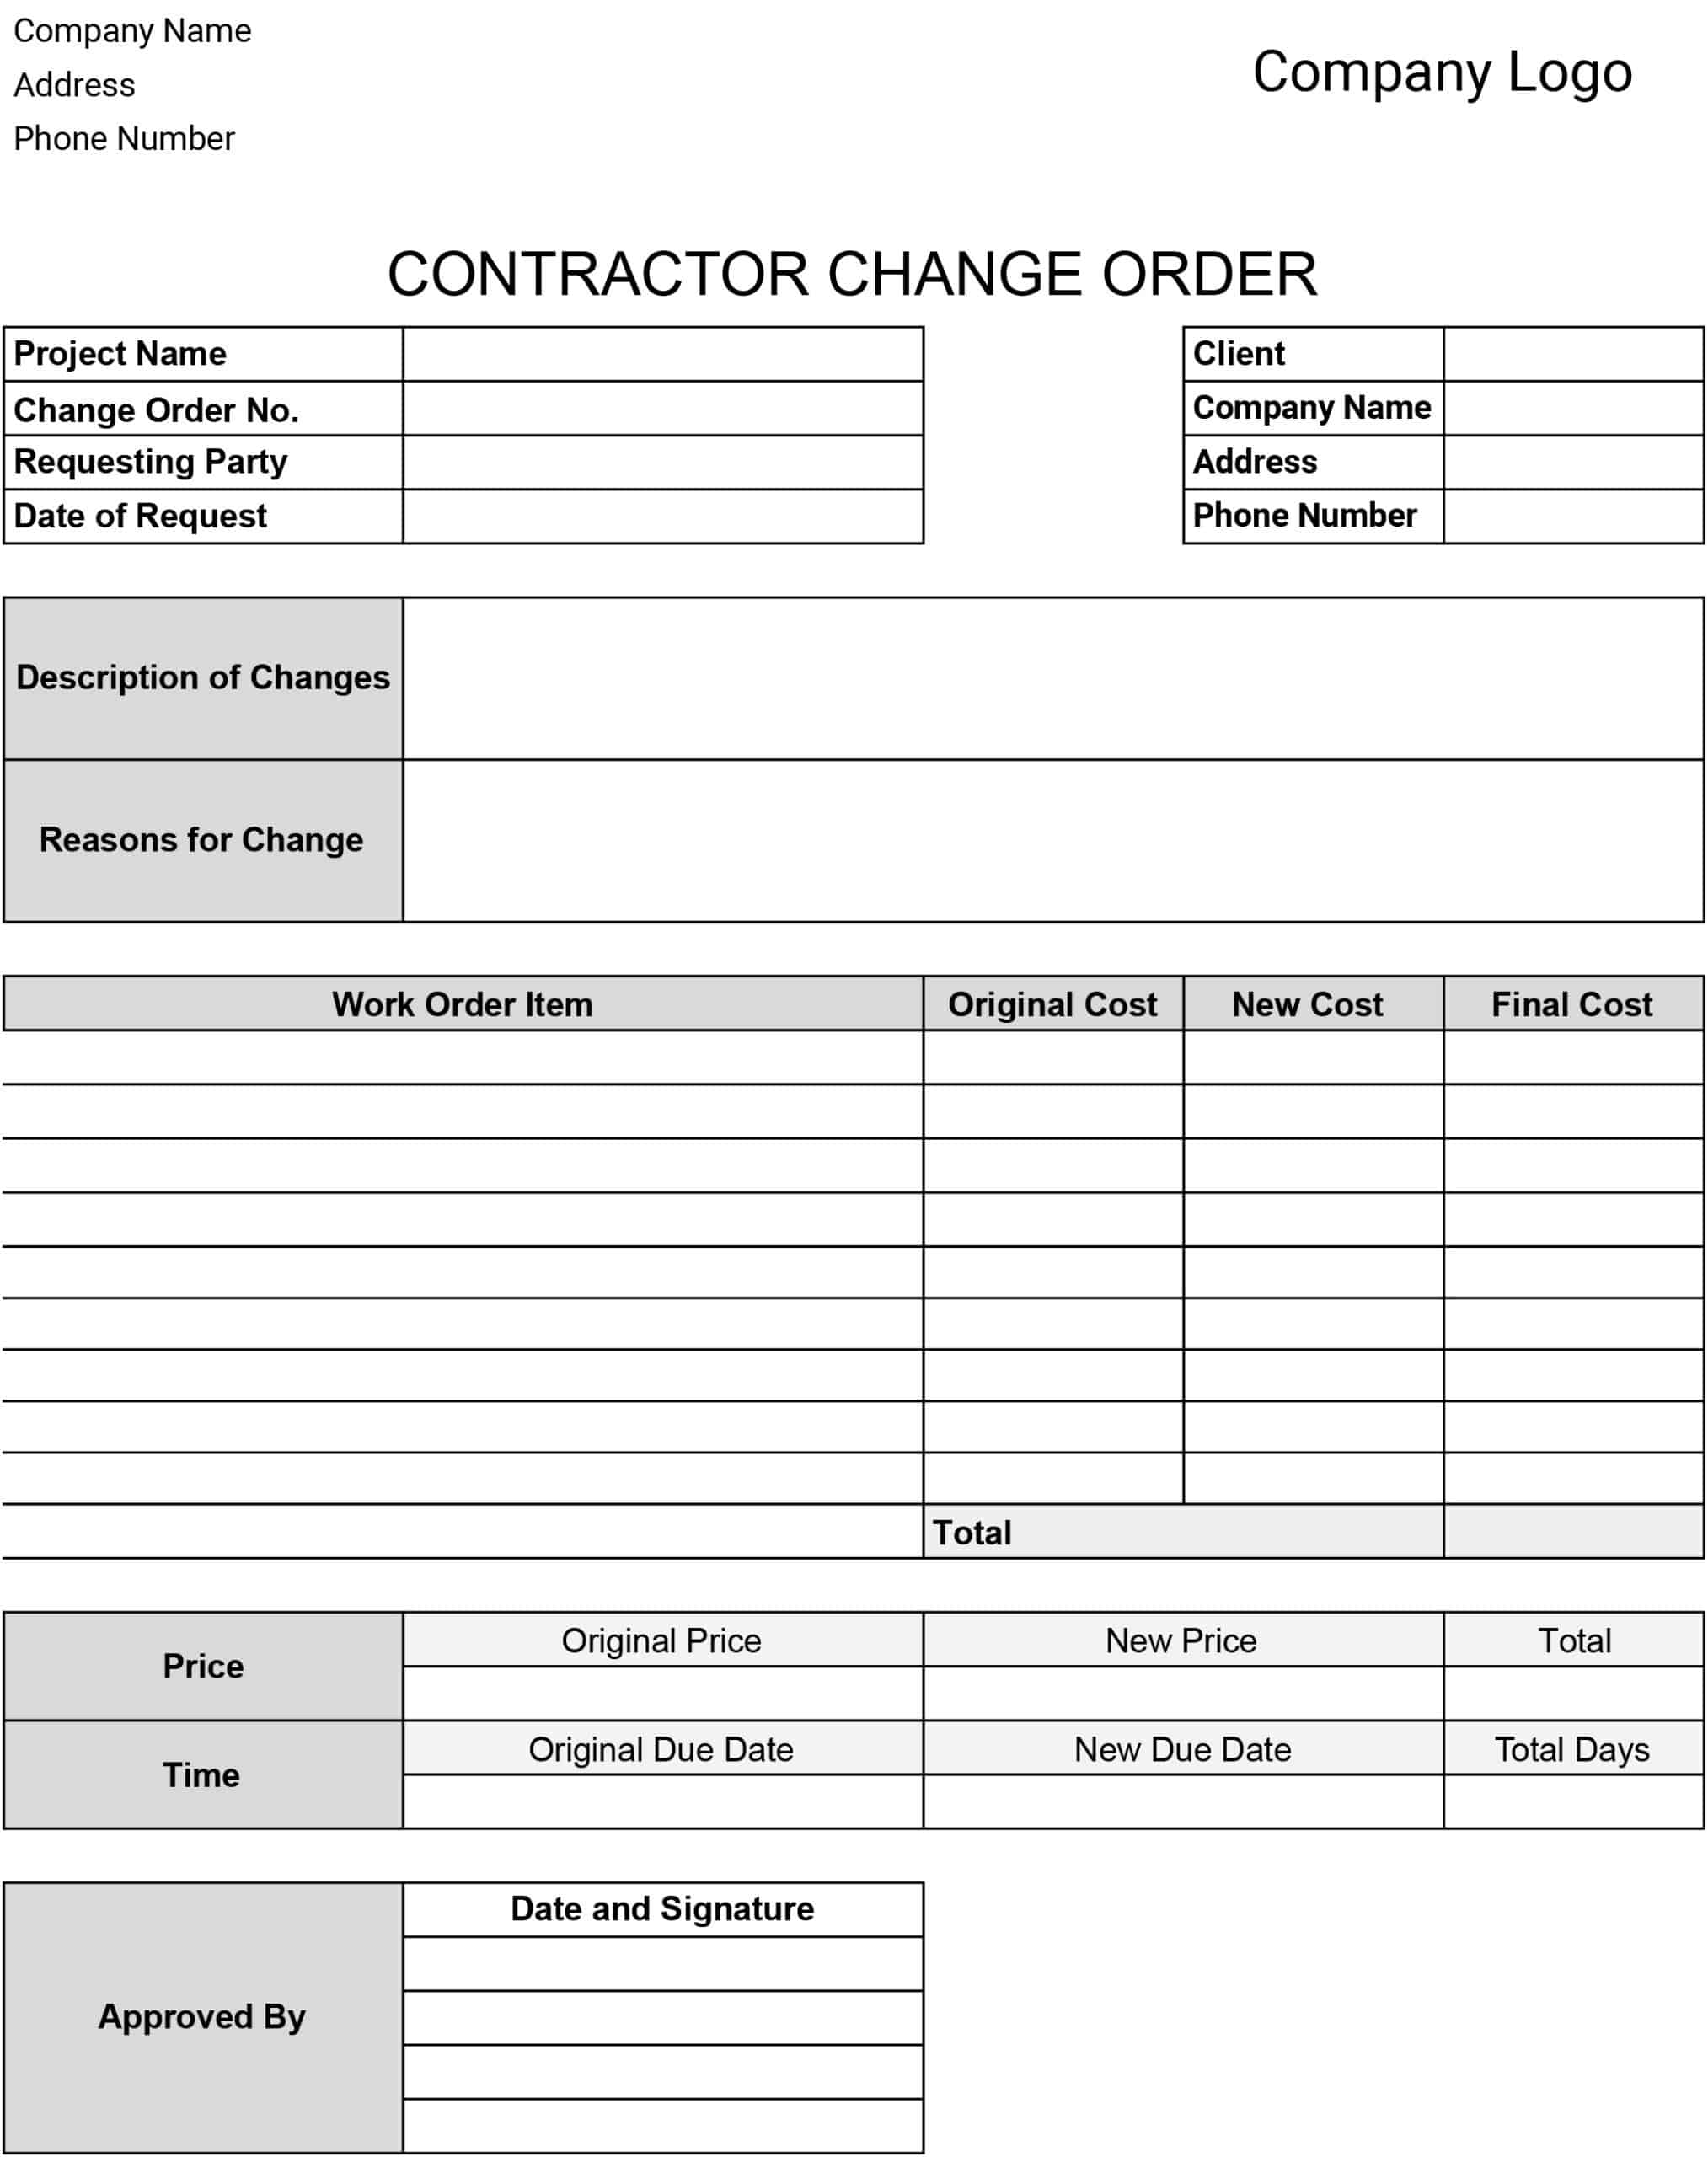 Change Order Templates: Download & Print for Free!